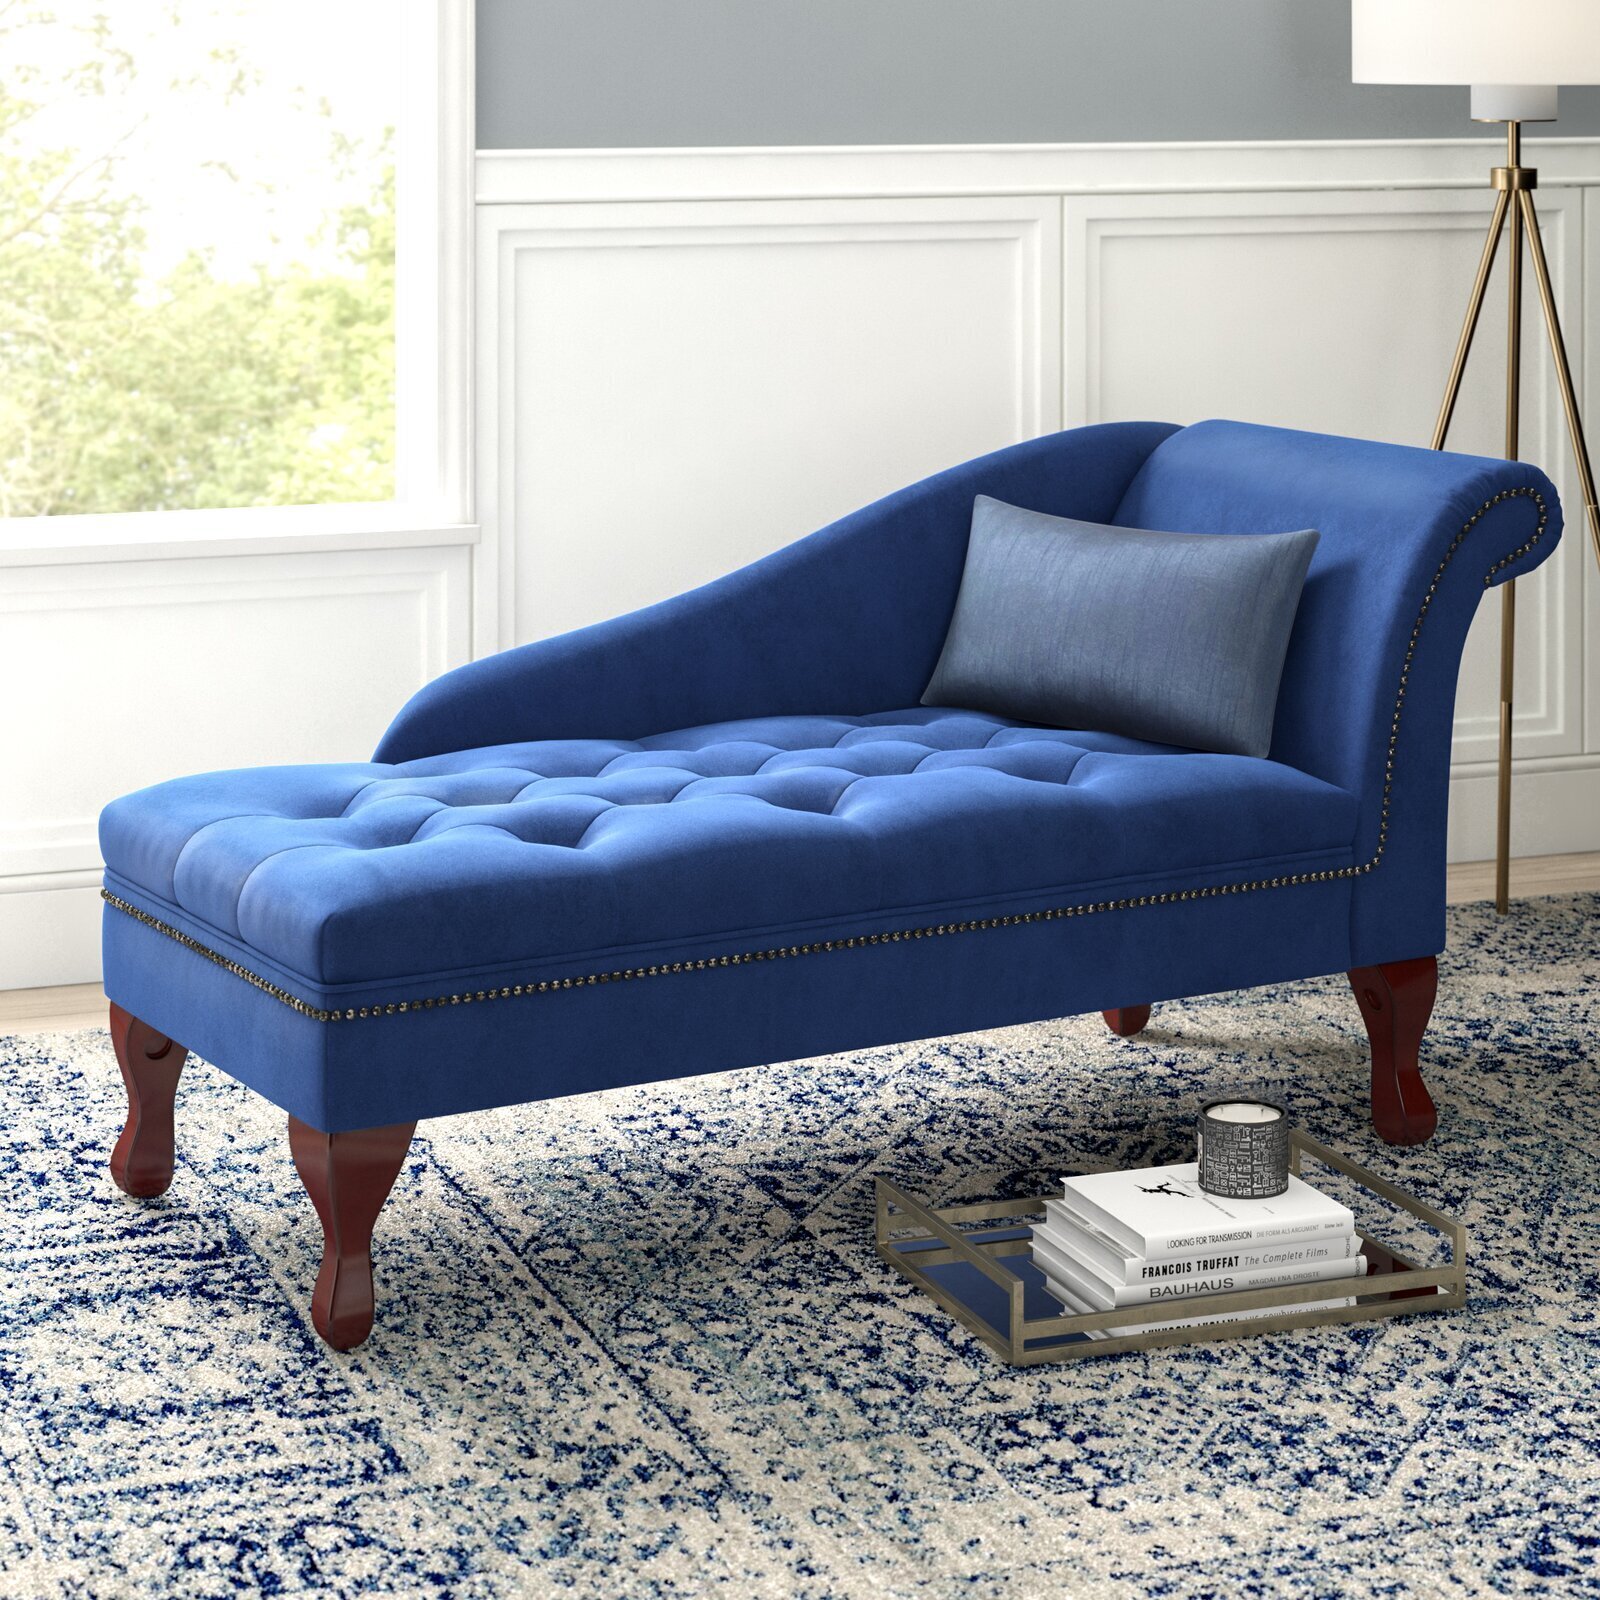 French style Chaise Lounge